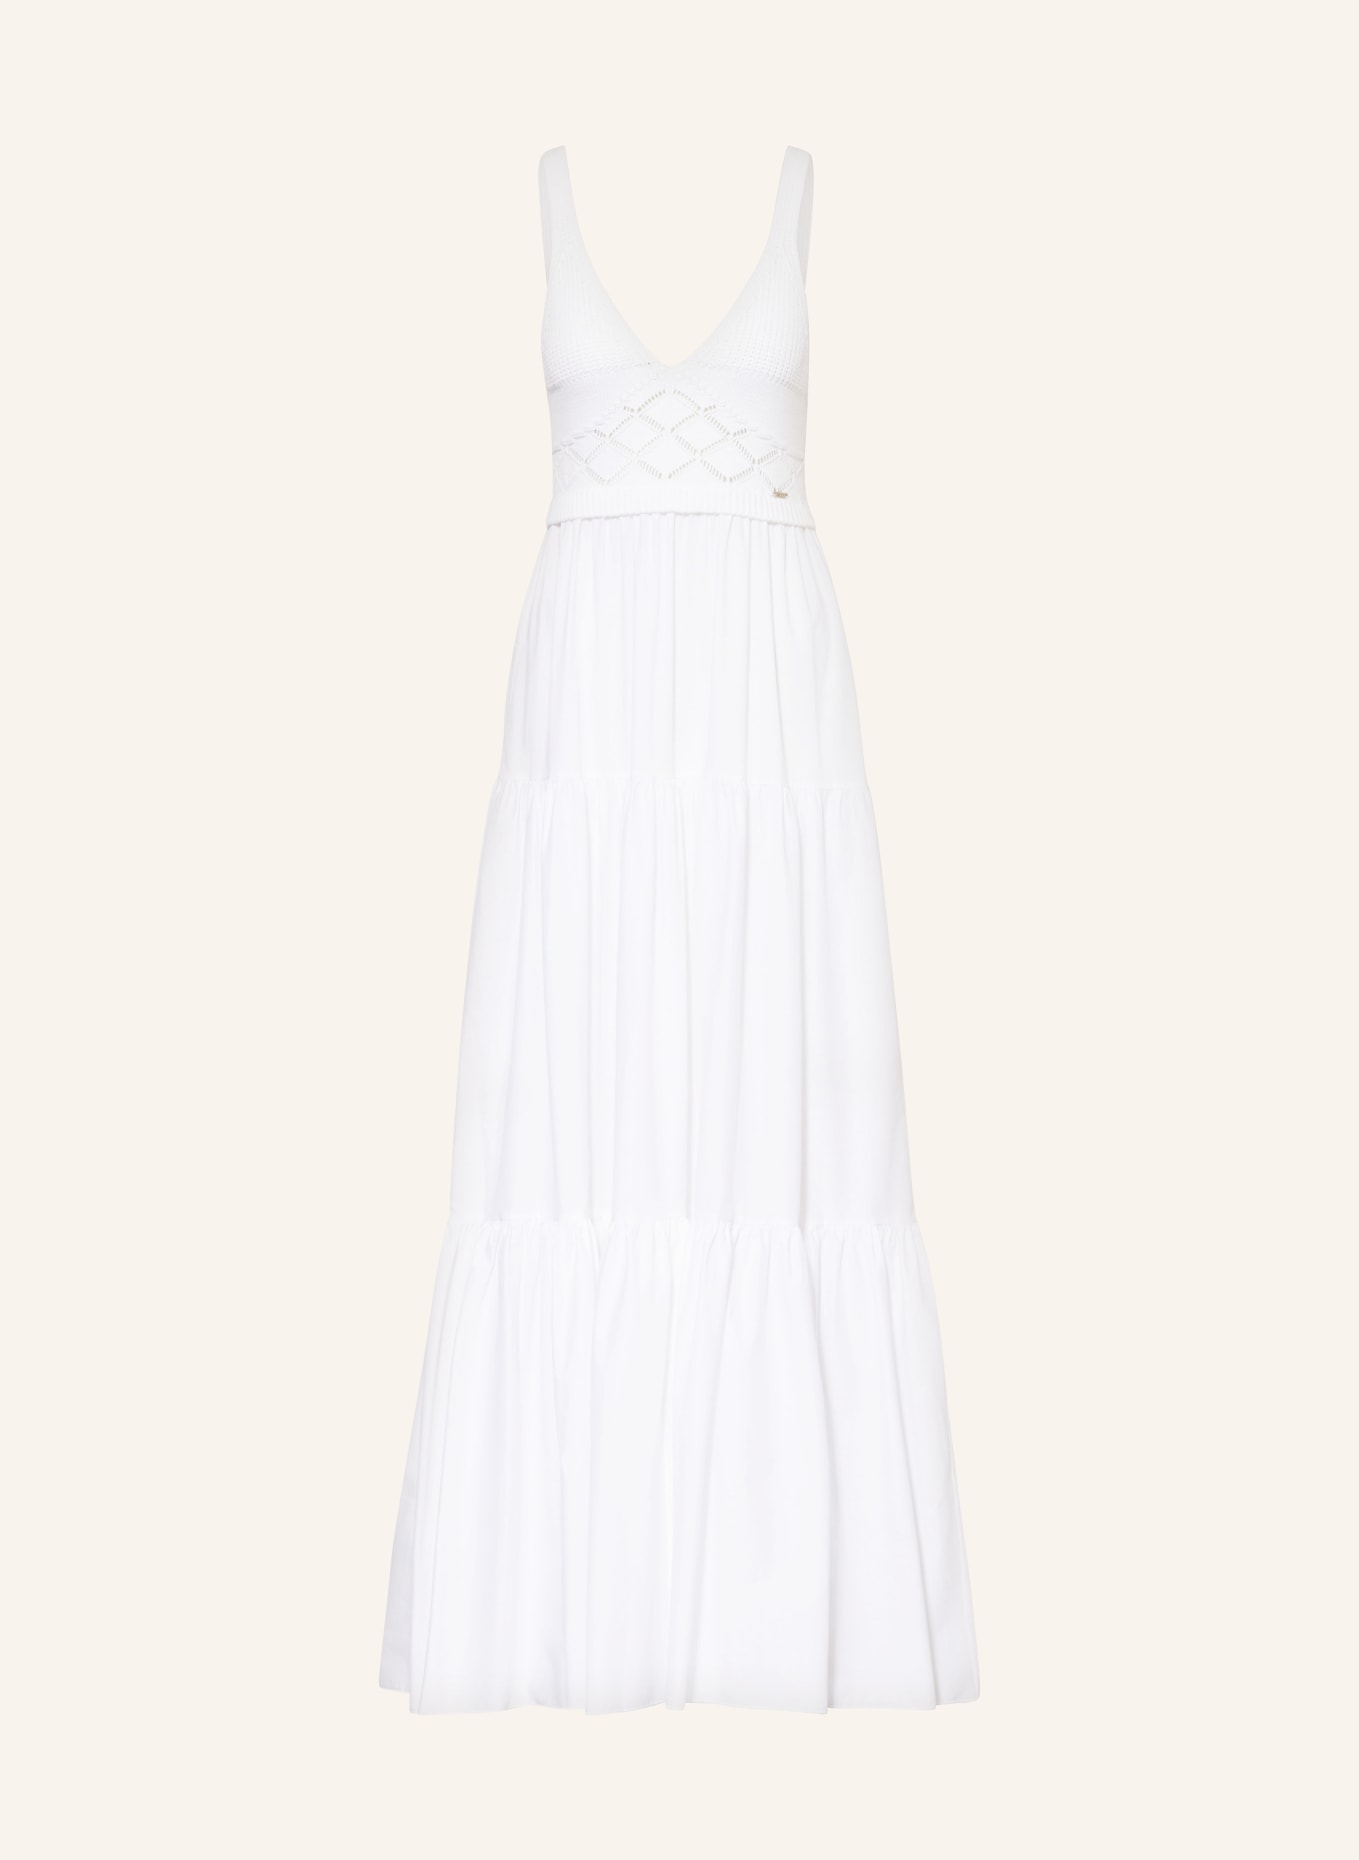 LIU JO Dress in mixed materials, Color: WHITE (Image 1)